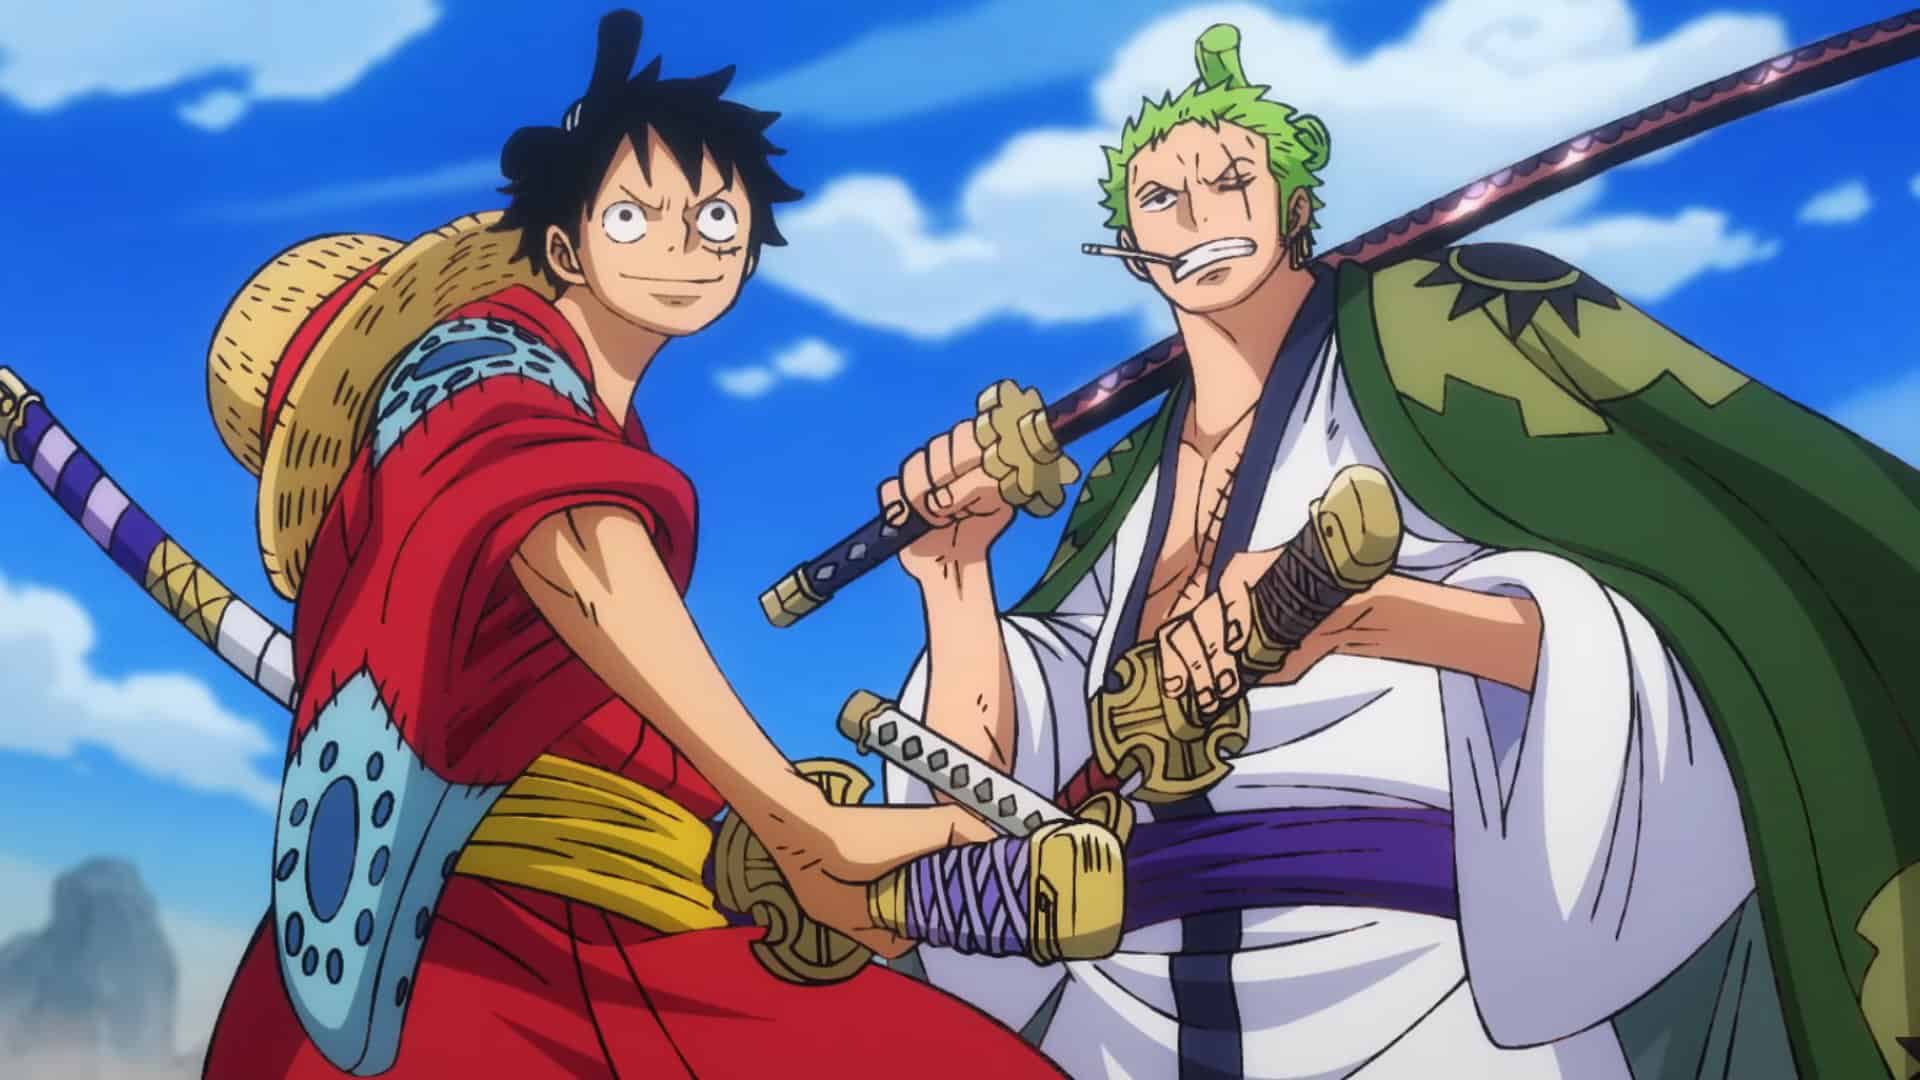 One Piece's Wano Country Arc featuring Luffy and Zoro.